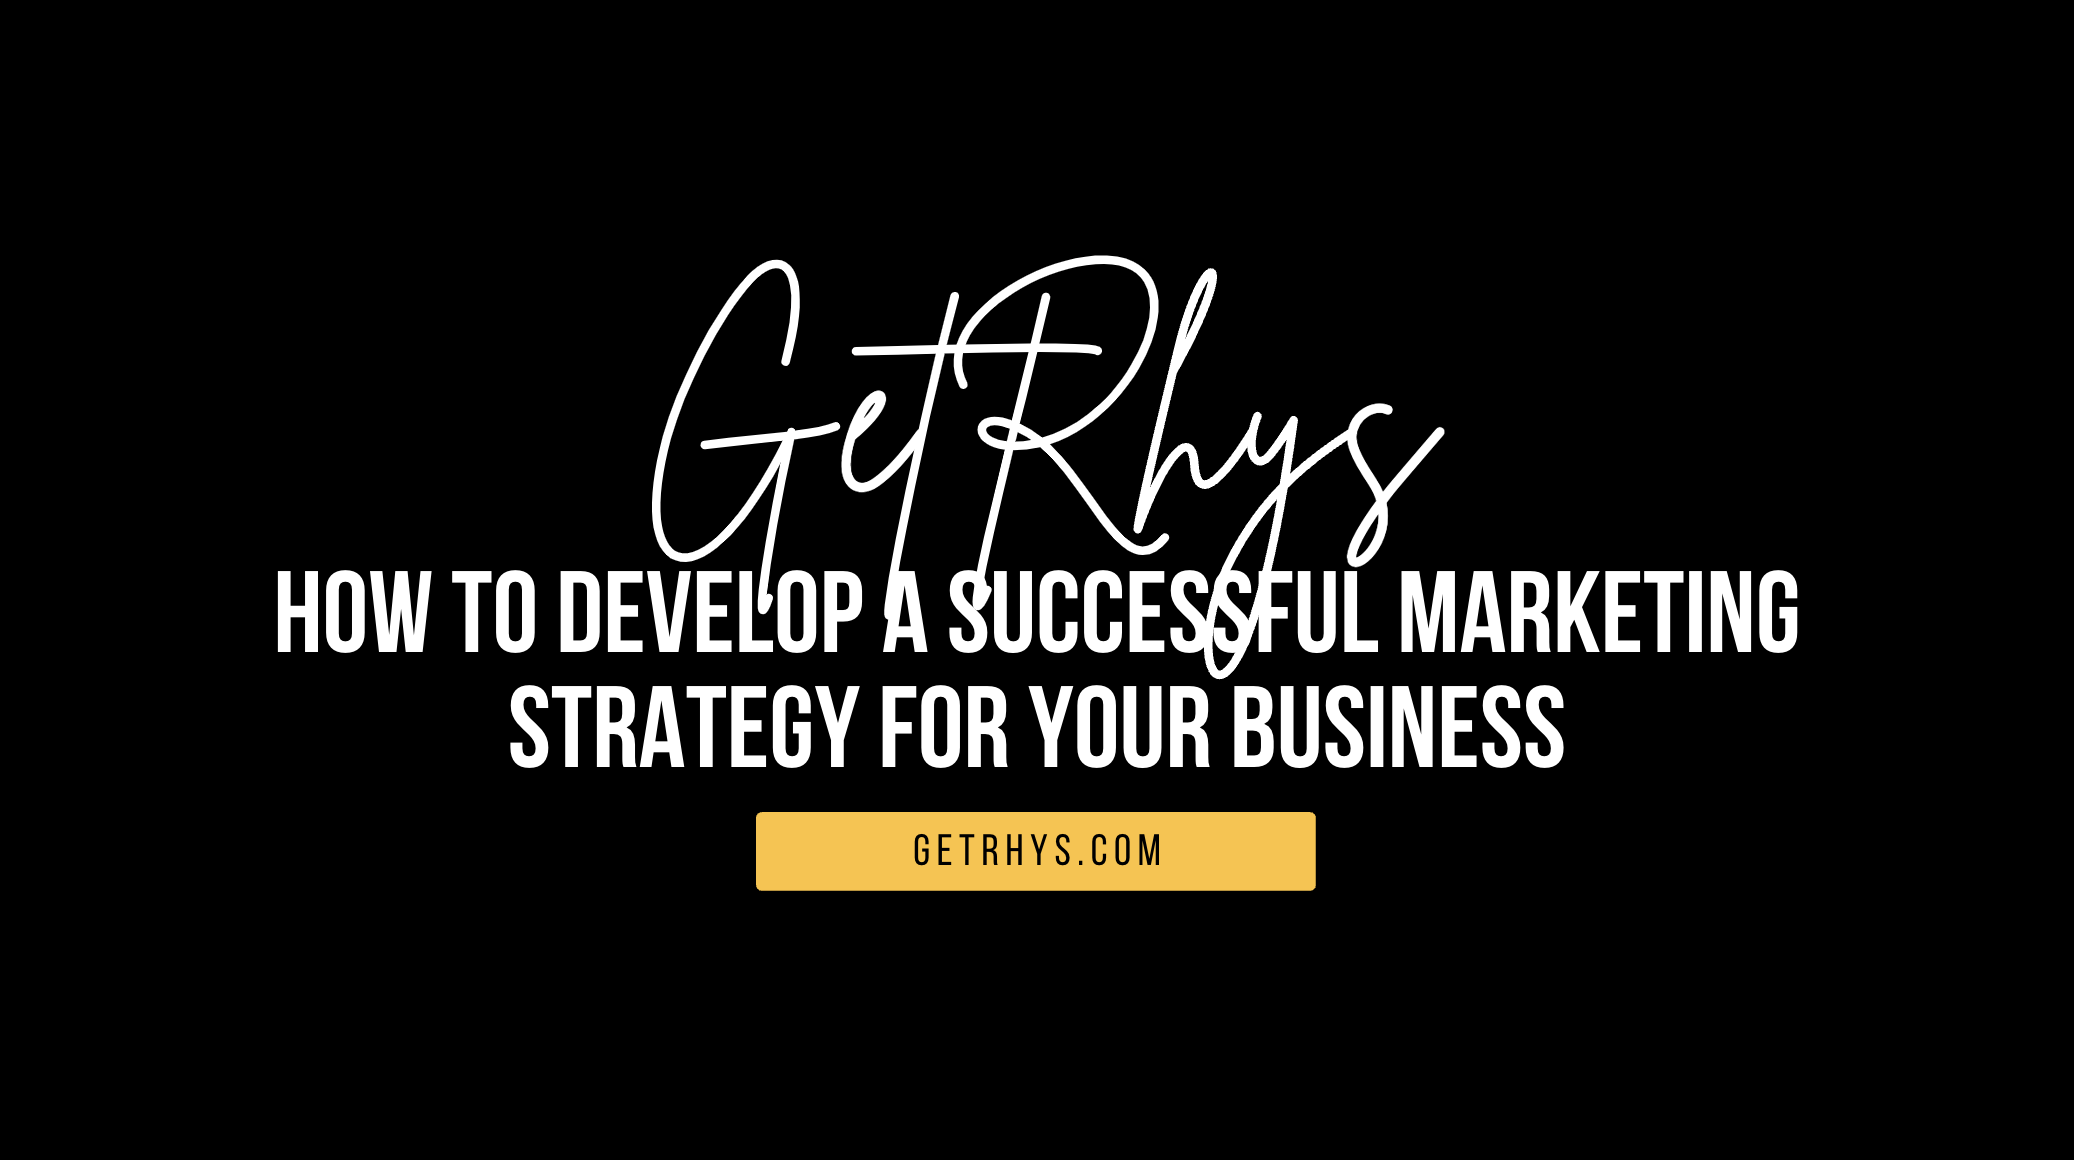 How to develop a successful marketing strategy for your business